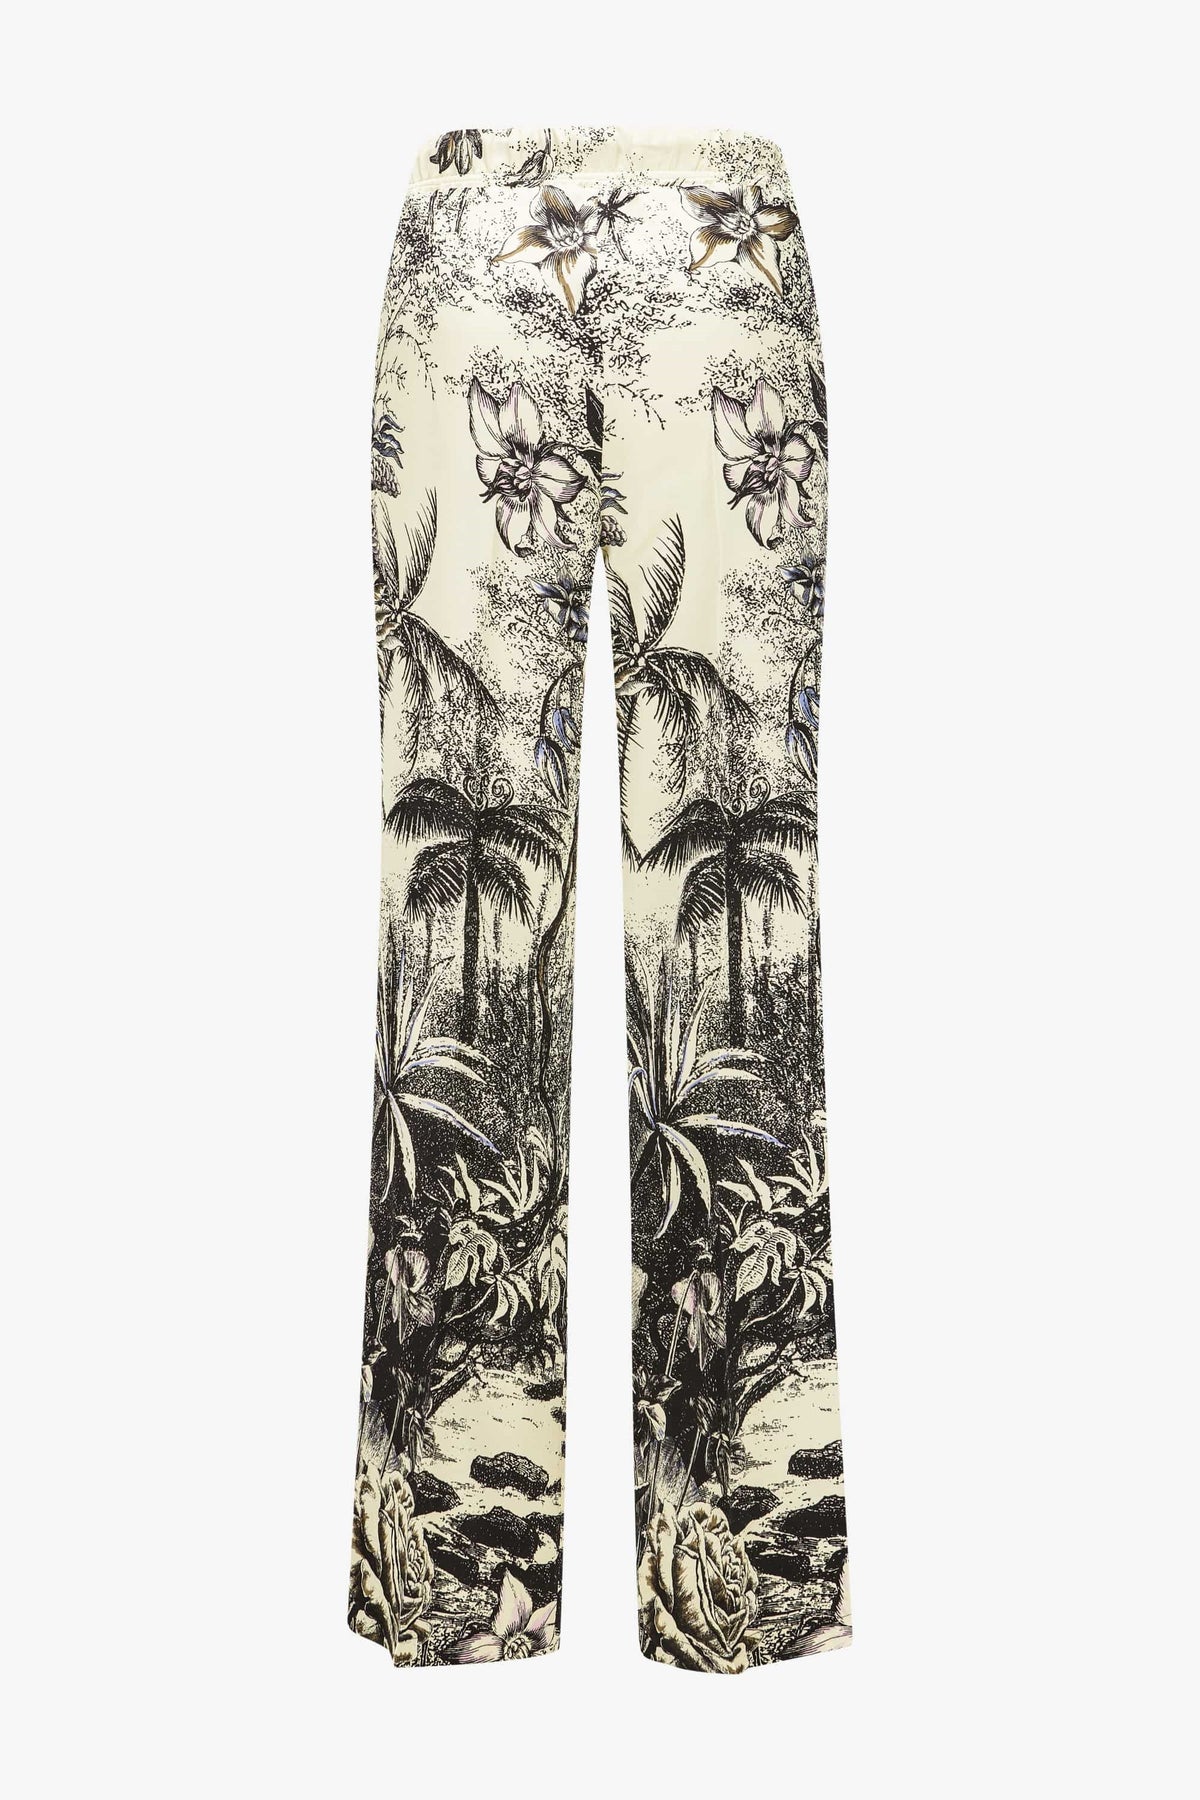 Cambio Bothanical Garden Arvil Pant